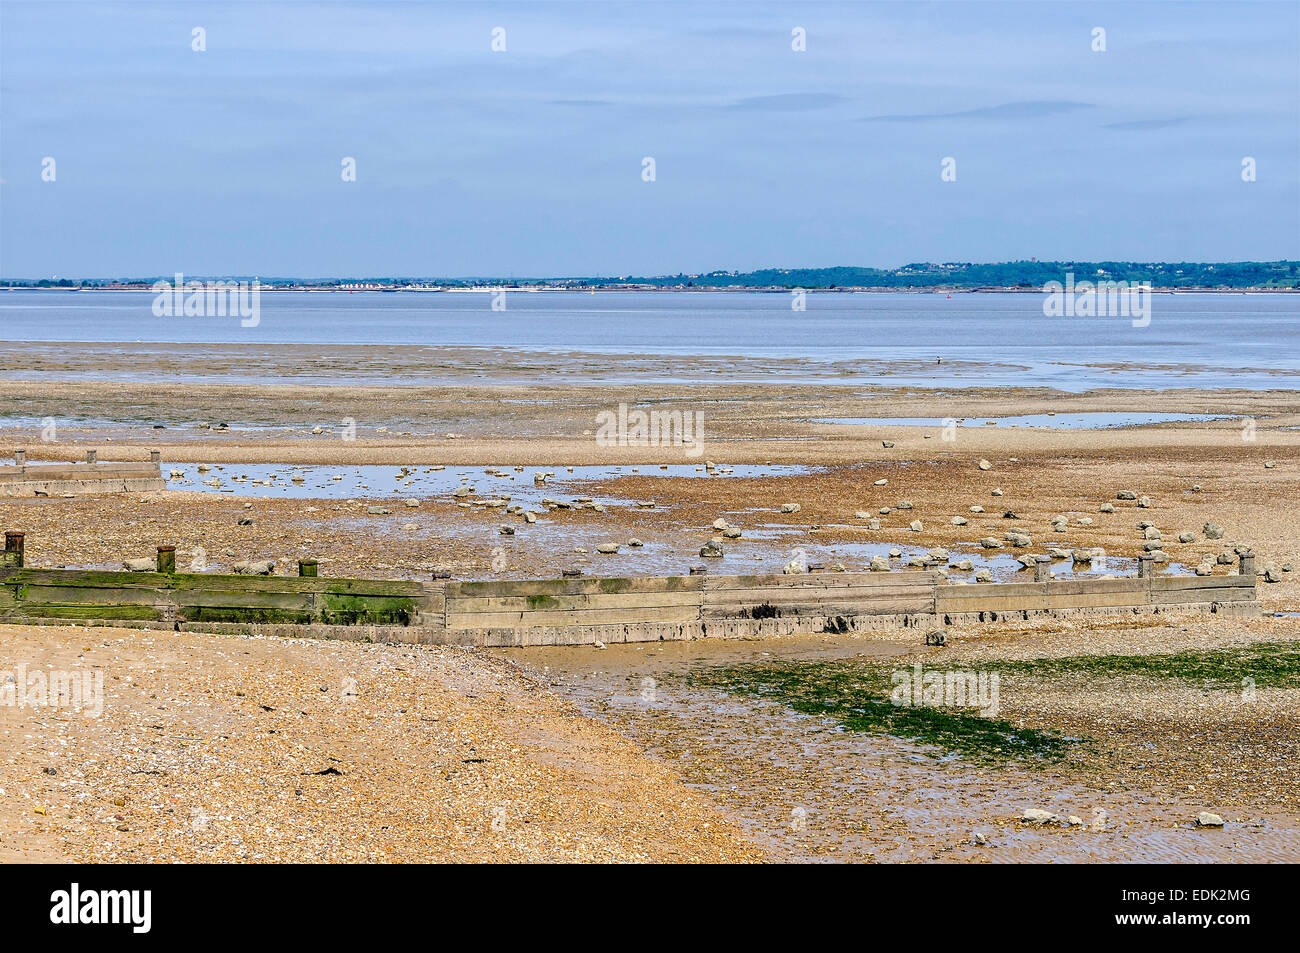 A tranquil River Thames flows past a muddy shingle beach on one bank and industrial and domestic buildings on the other shore Stock Photo